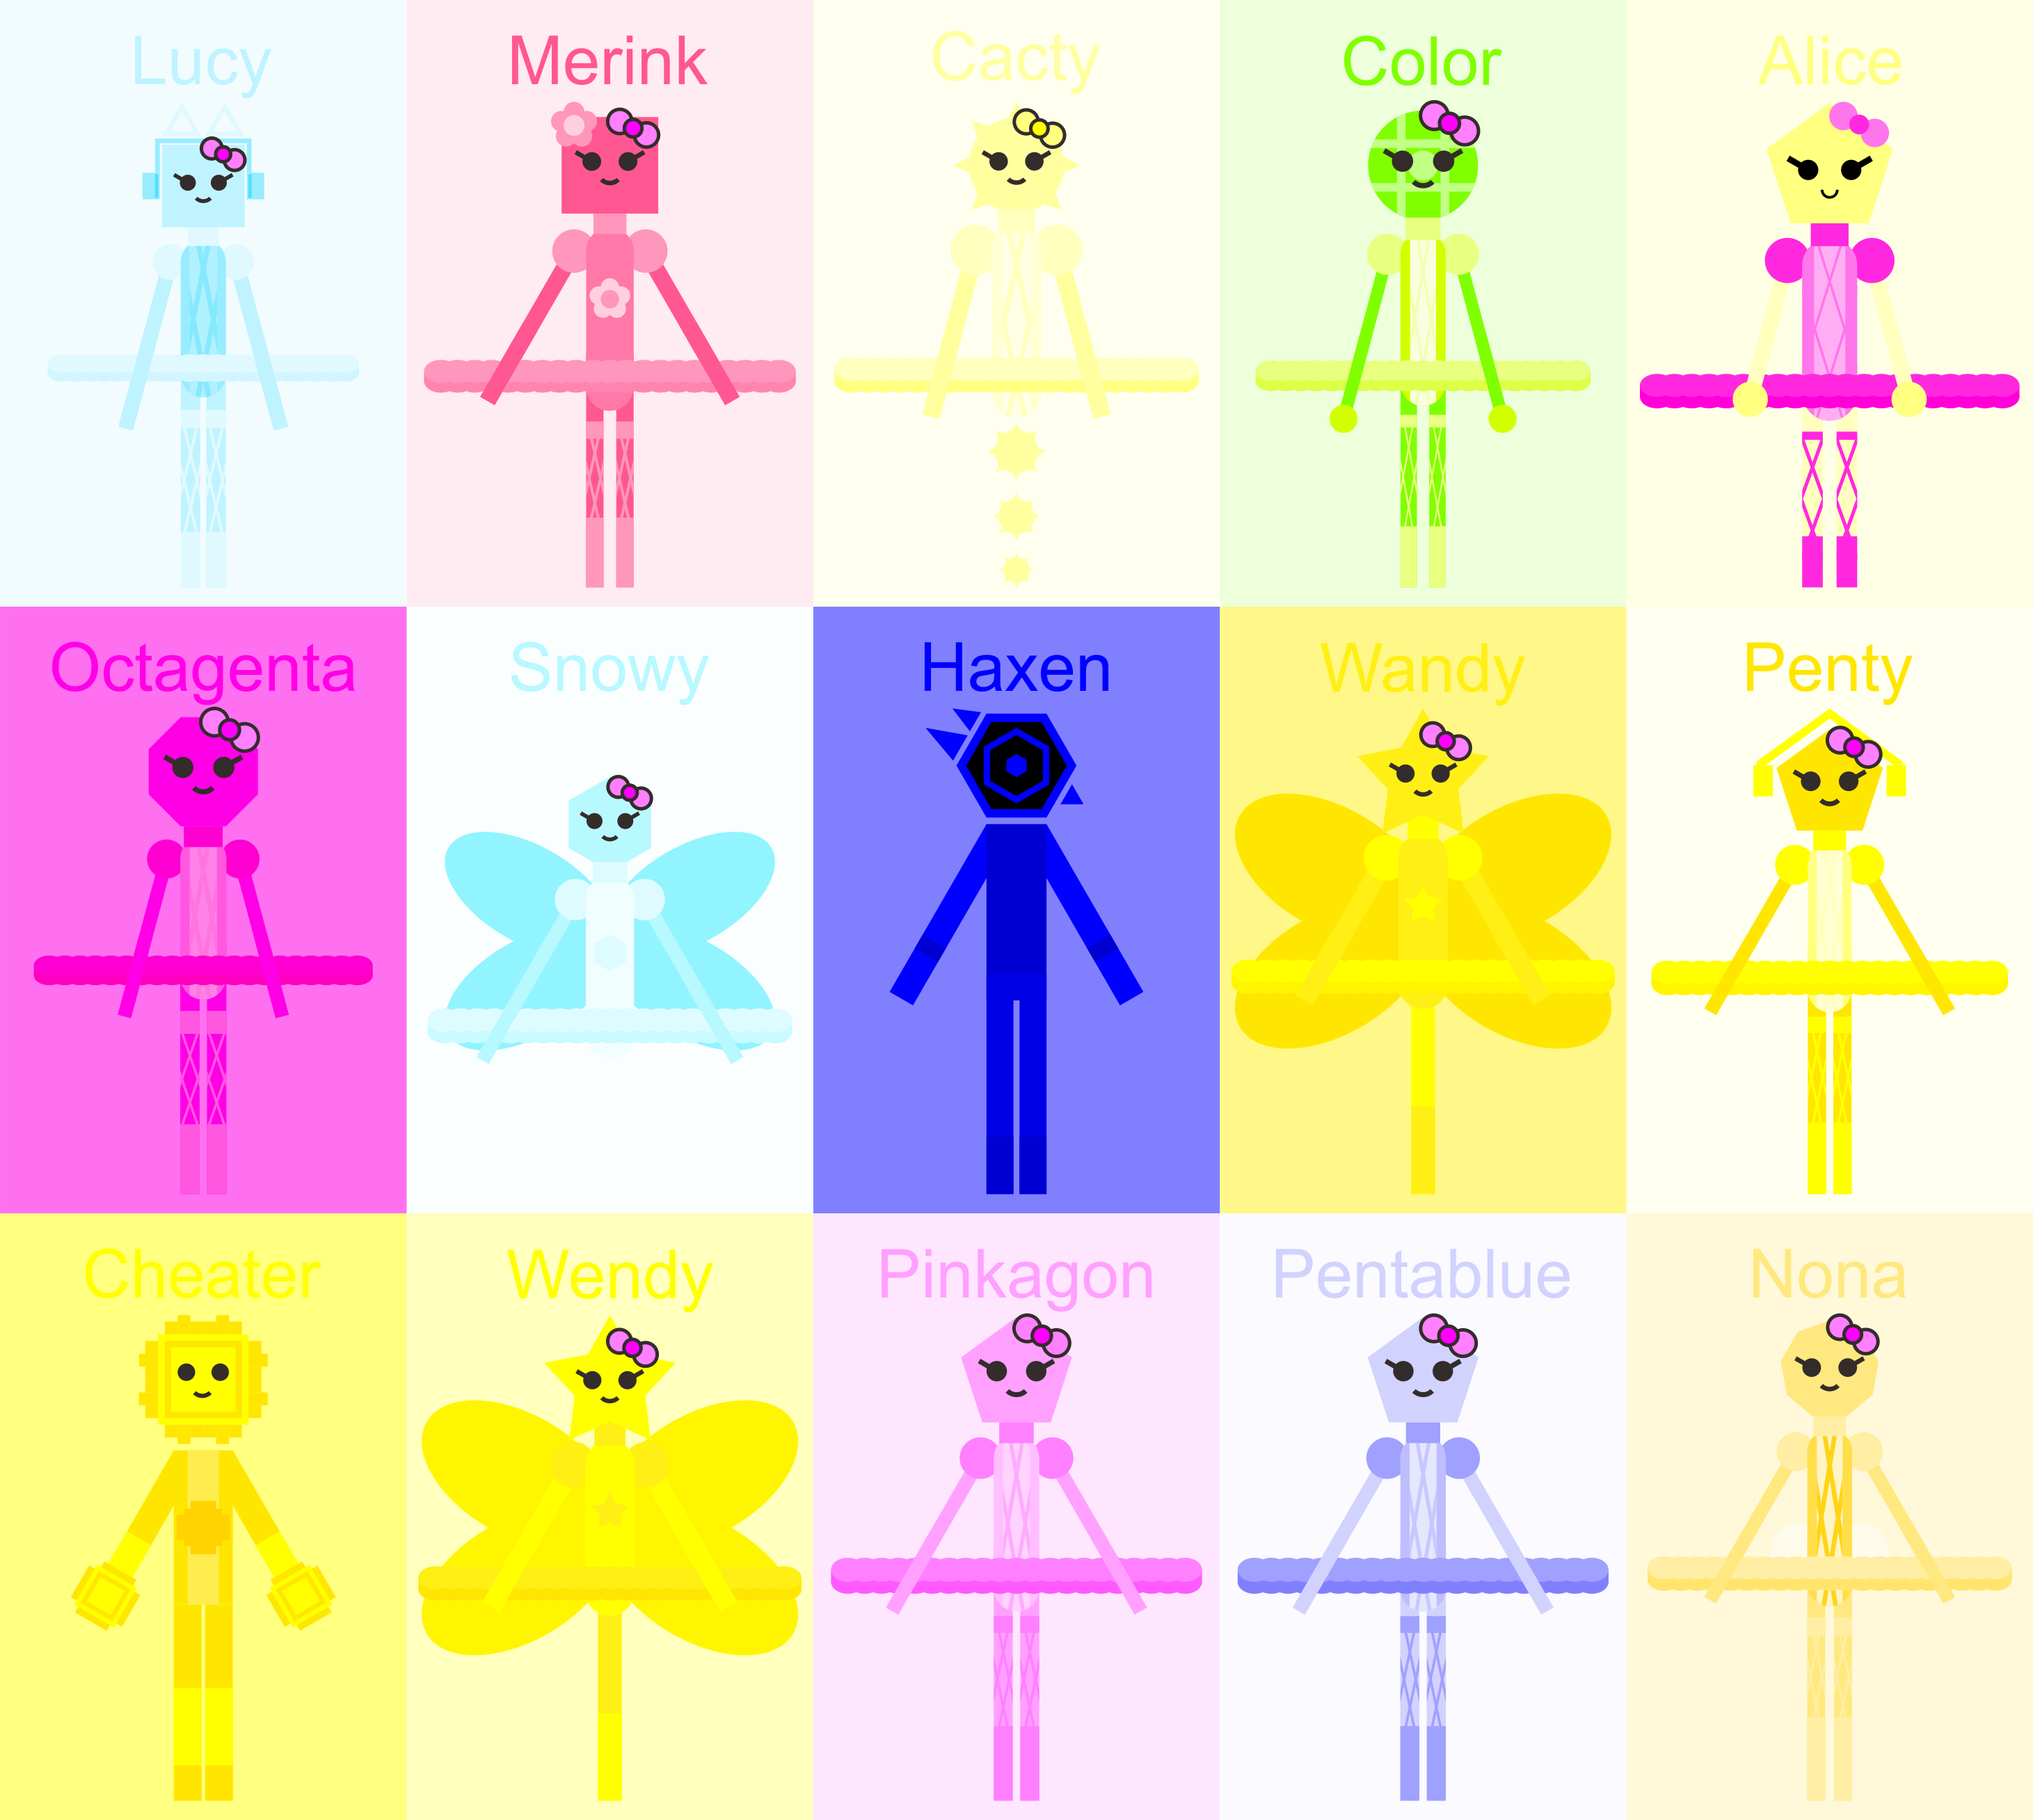 My Jsab Characters Version In Colored Version by WikiGirl2008 on DeviantArt